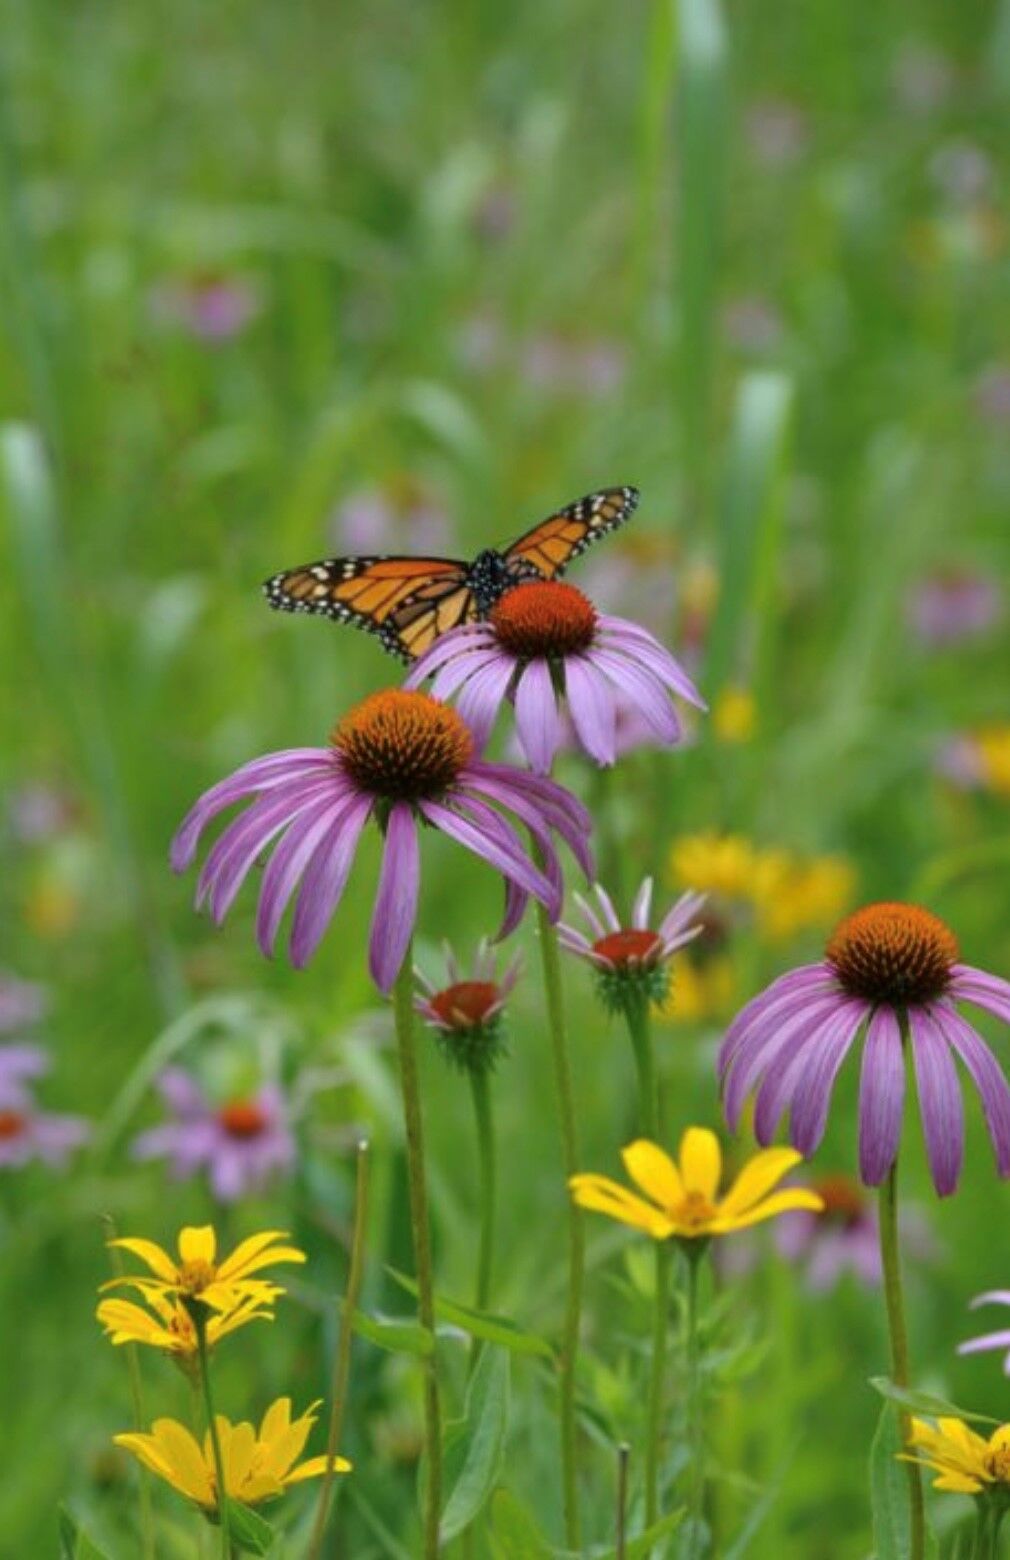 A butterfly on an echinacea flower photo